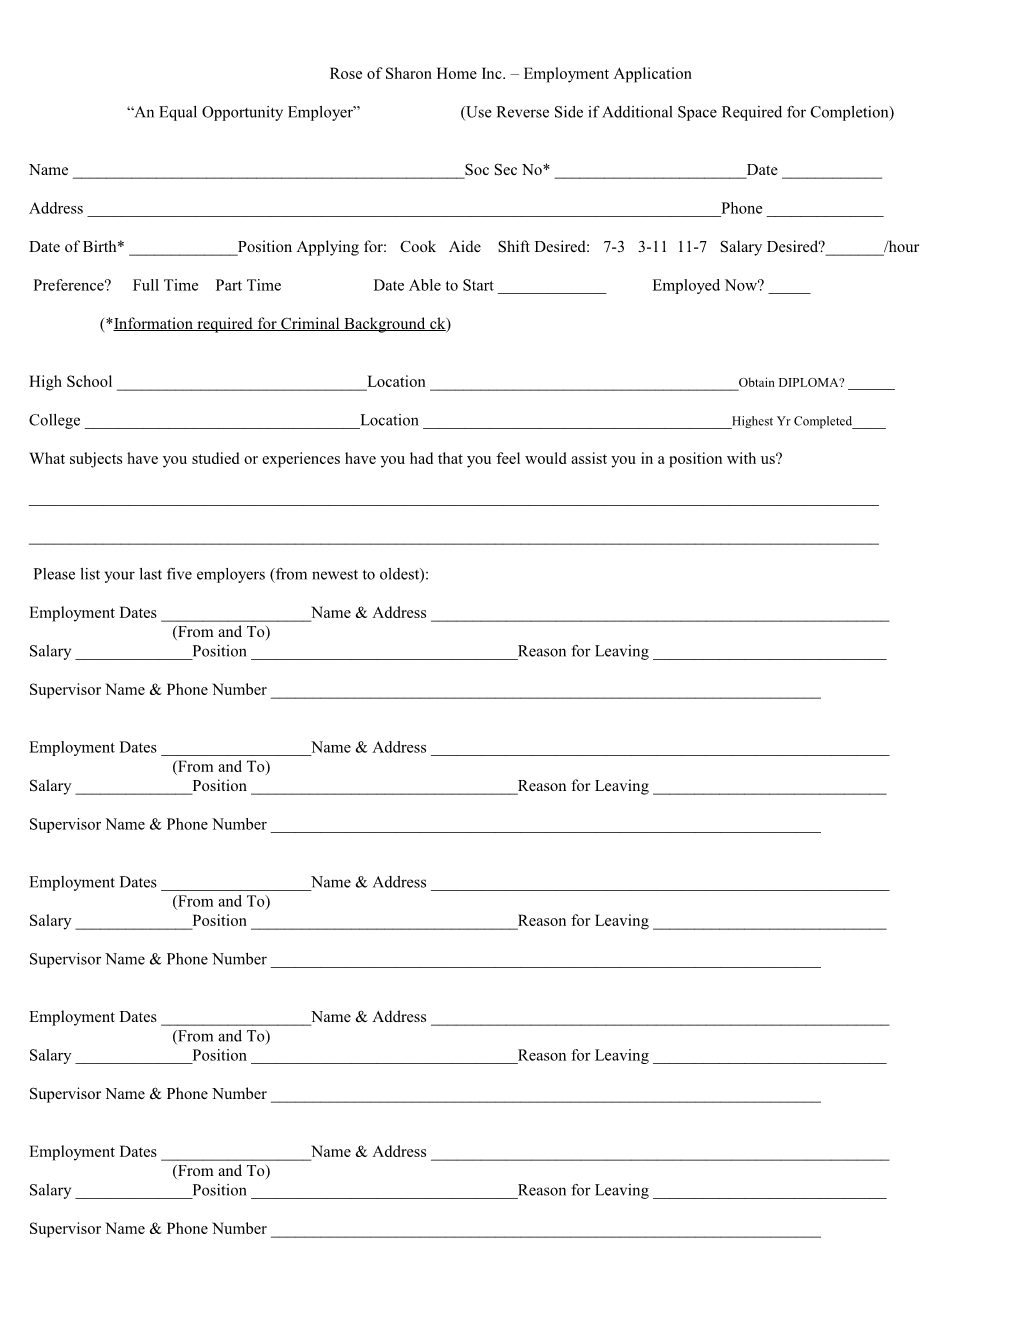 Rose of Sharon Home Employment Application